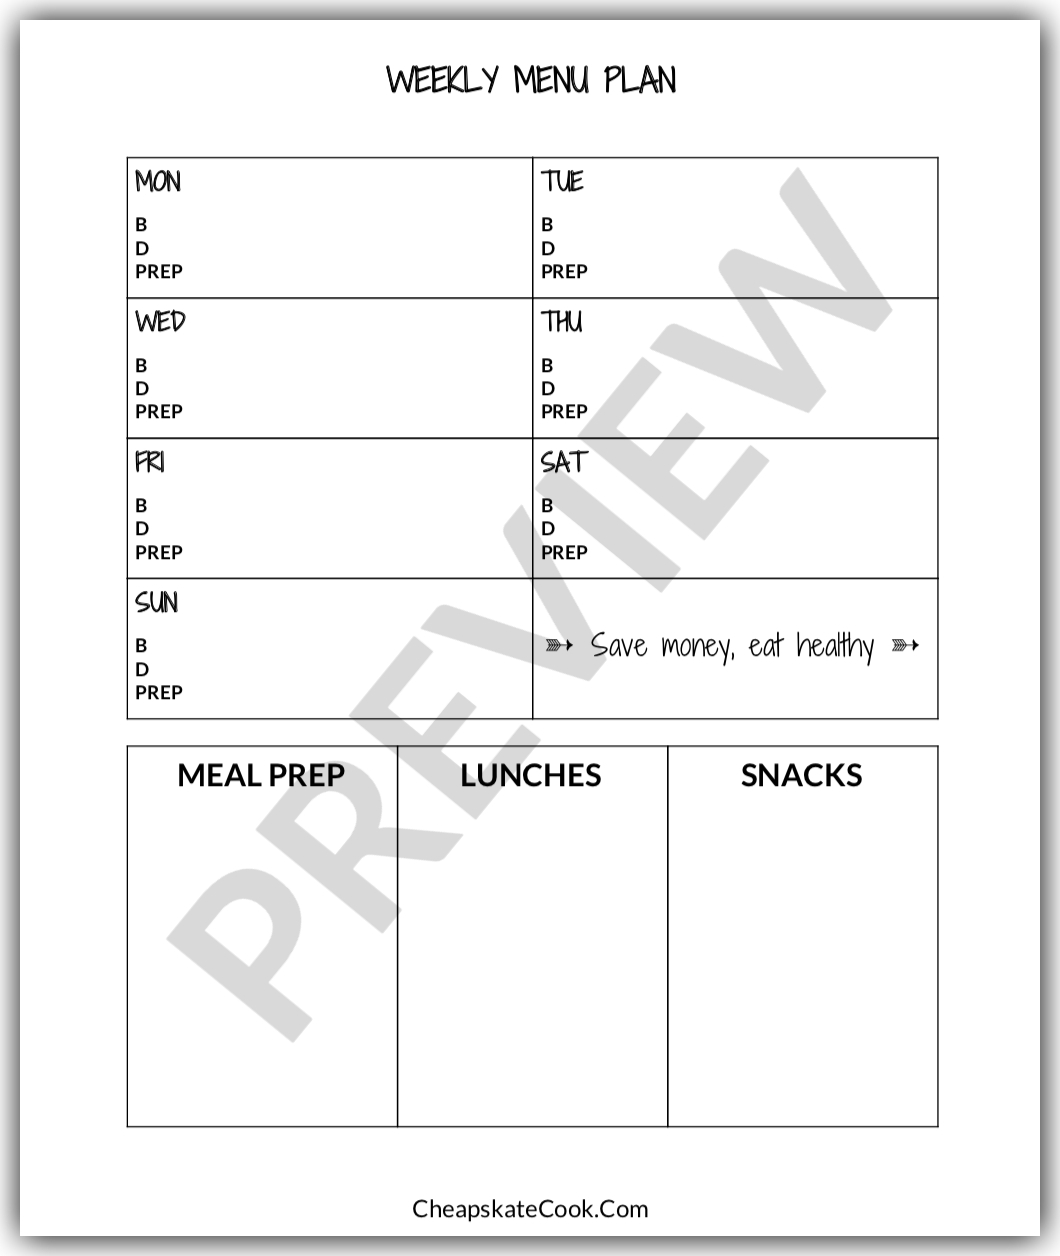 Menu plan printable with weekly lunch and meal prep sections